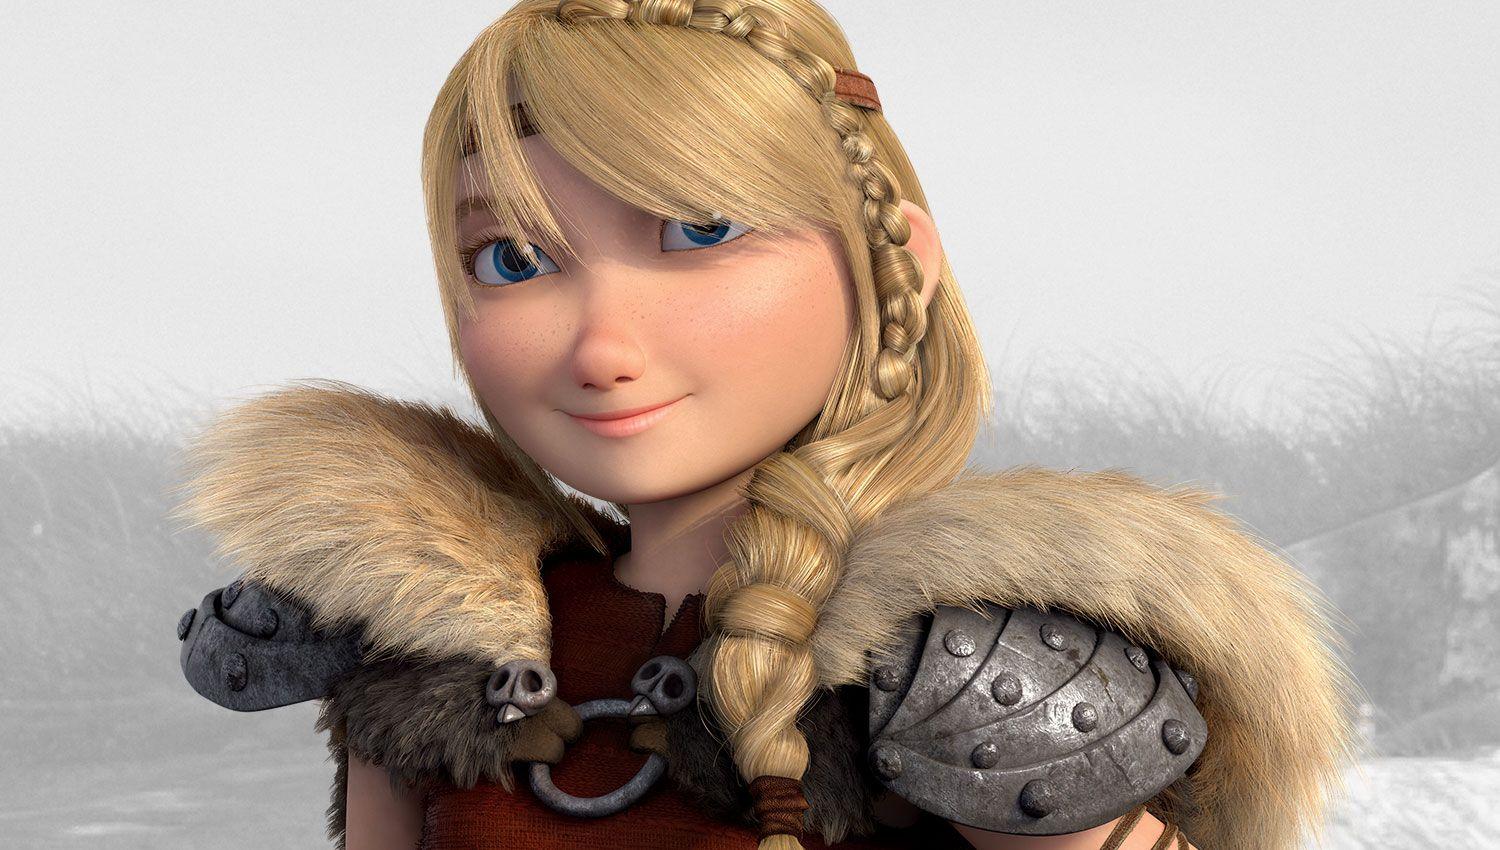 Astrid how to train your dragon